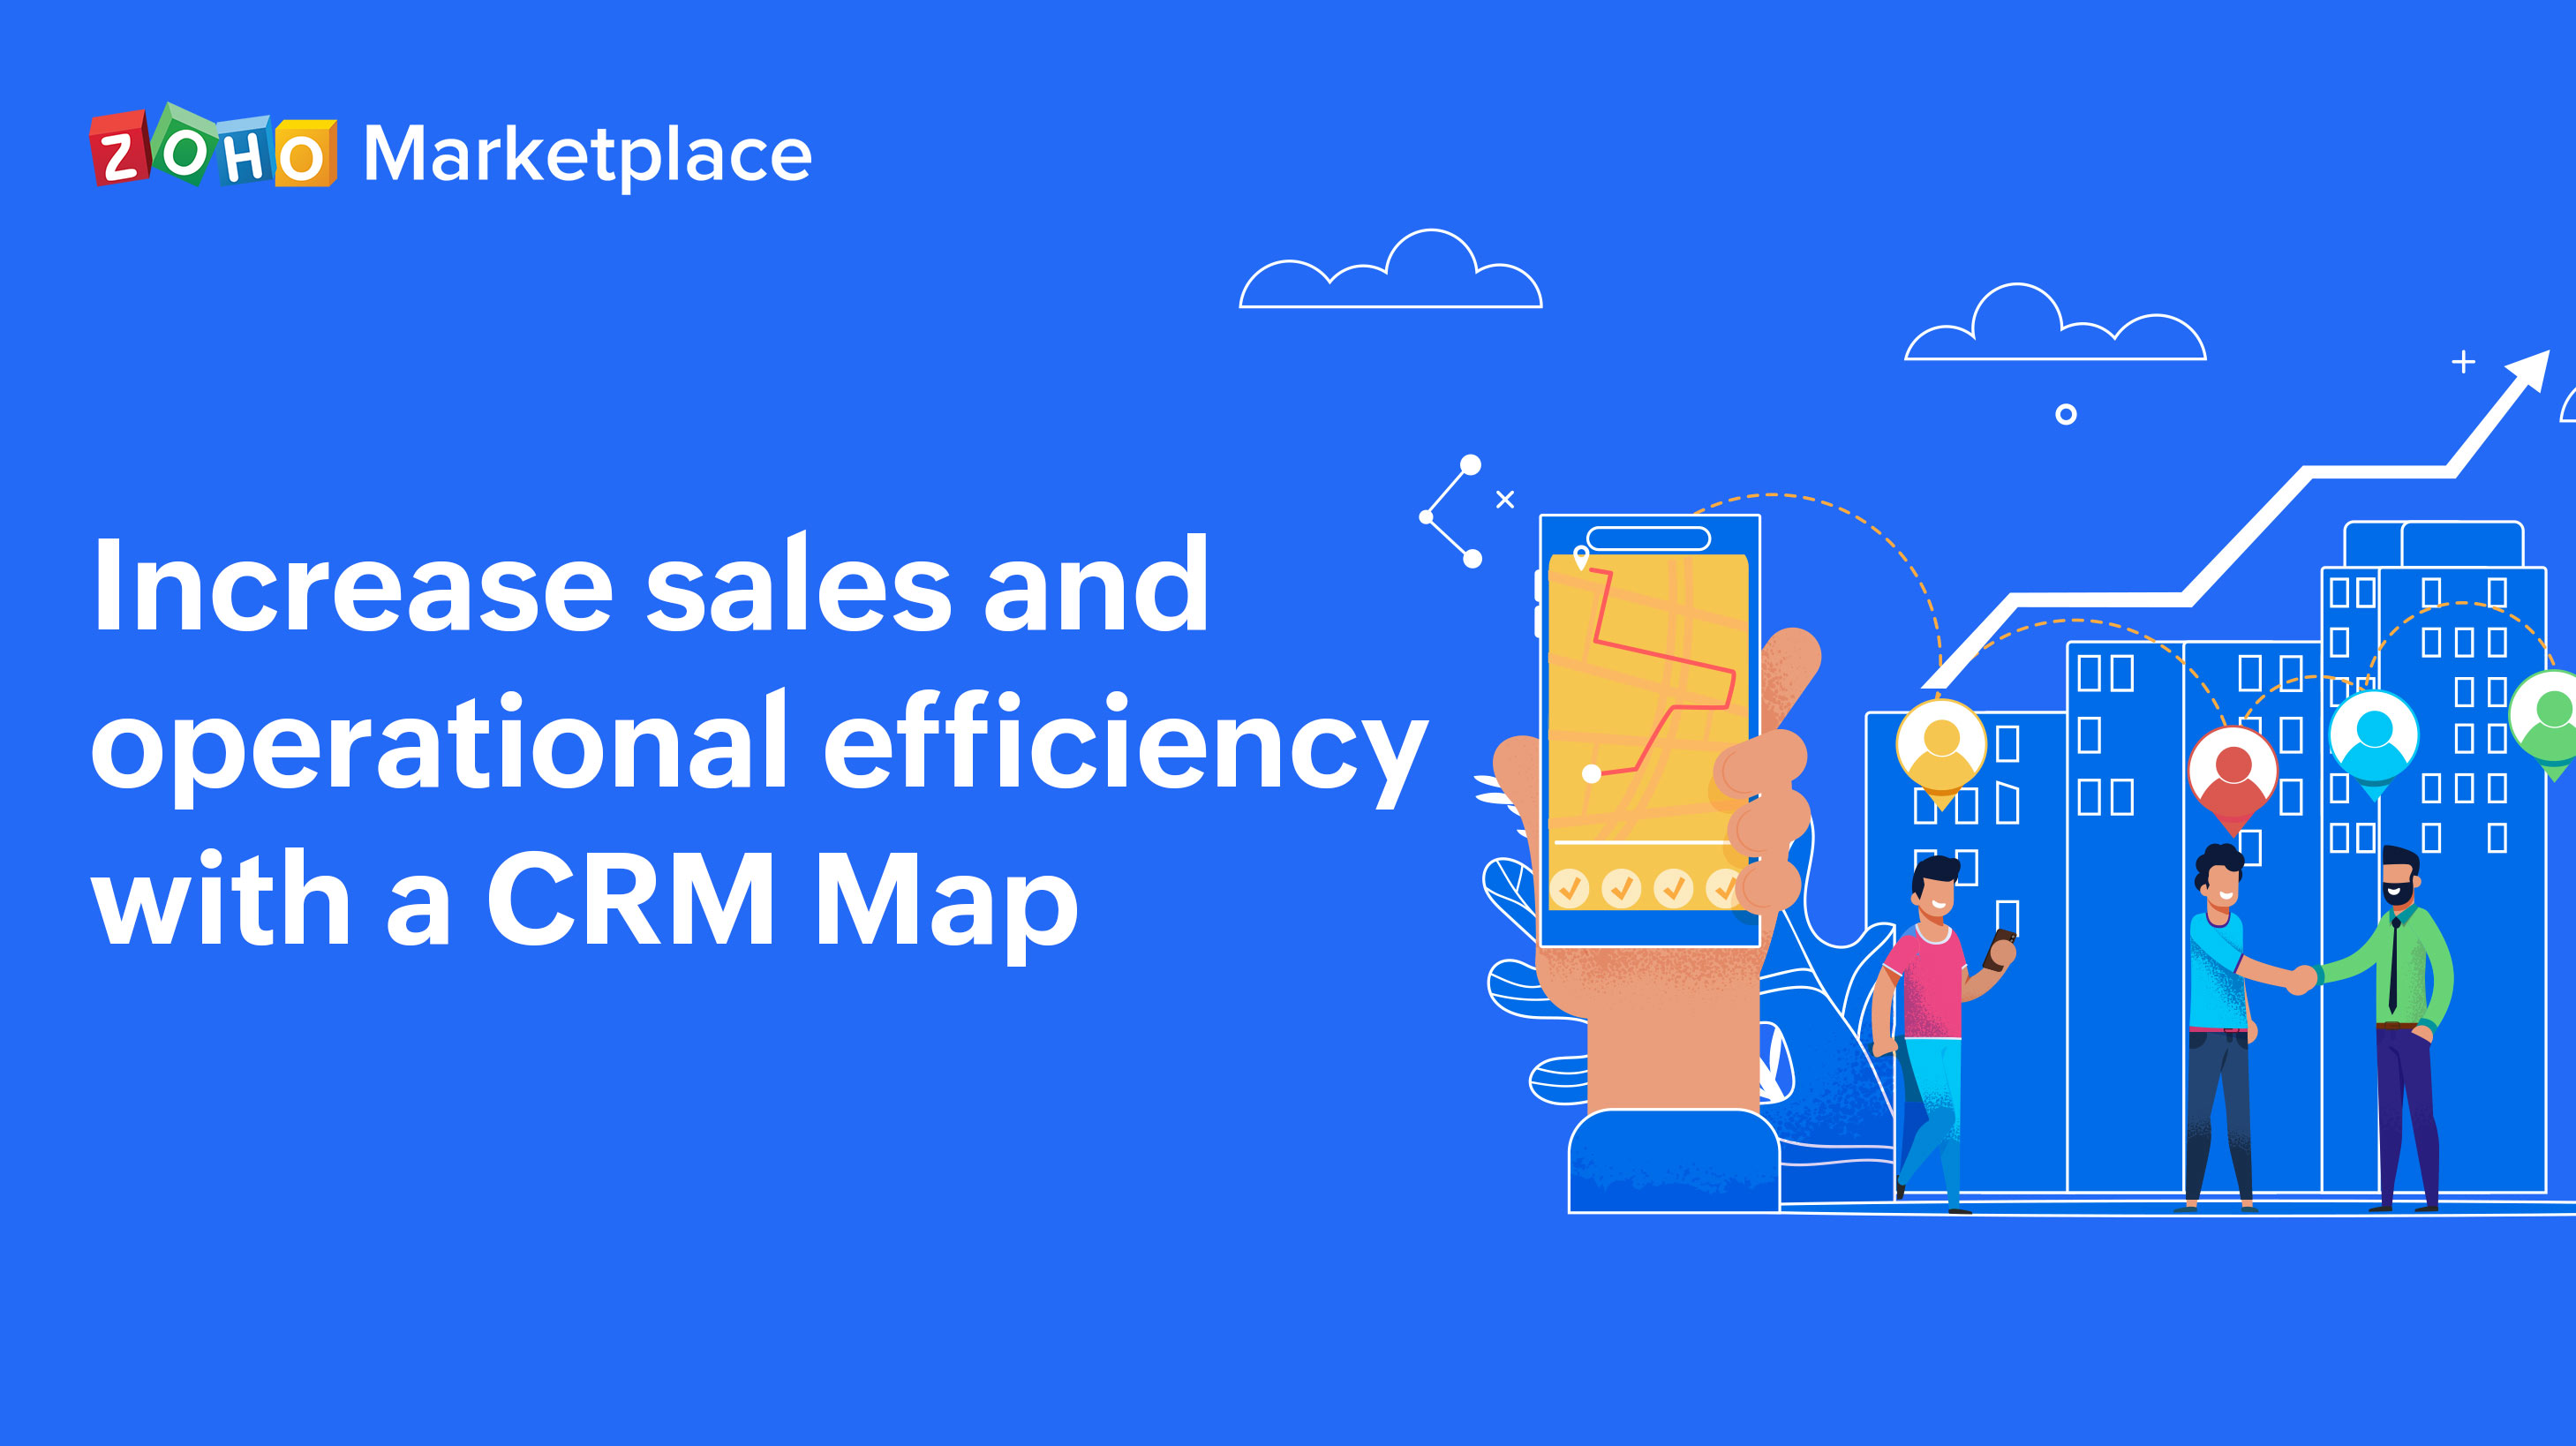 Increase sales and operational efficiency with a CRM Map